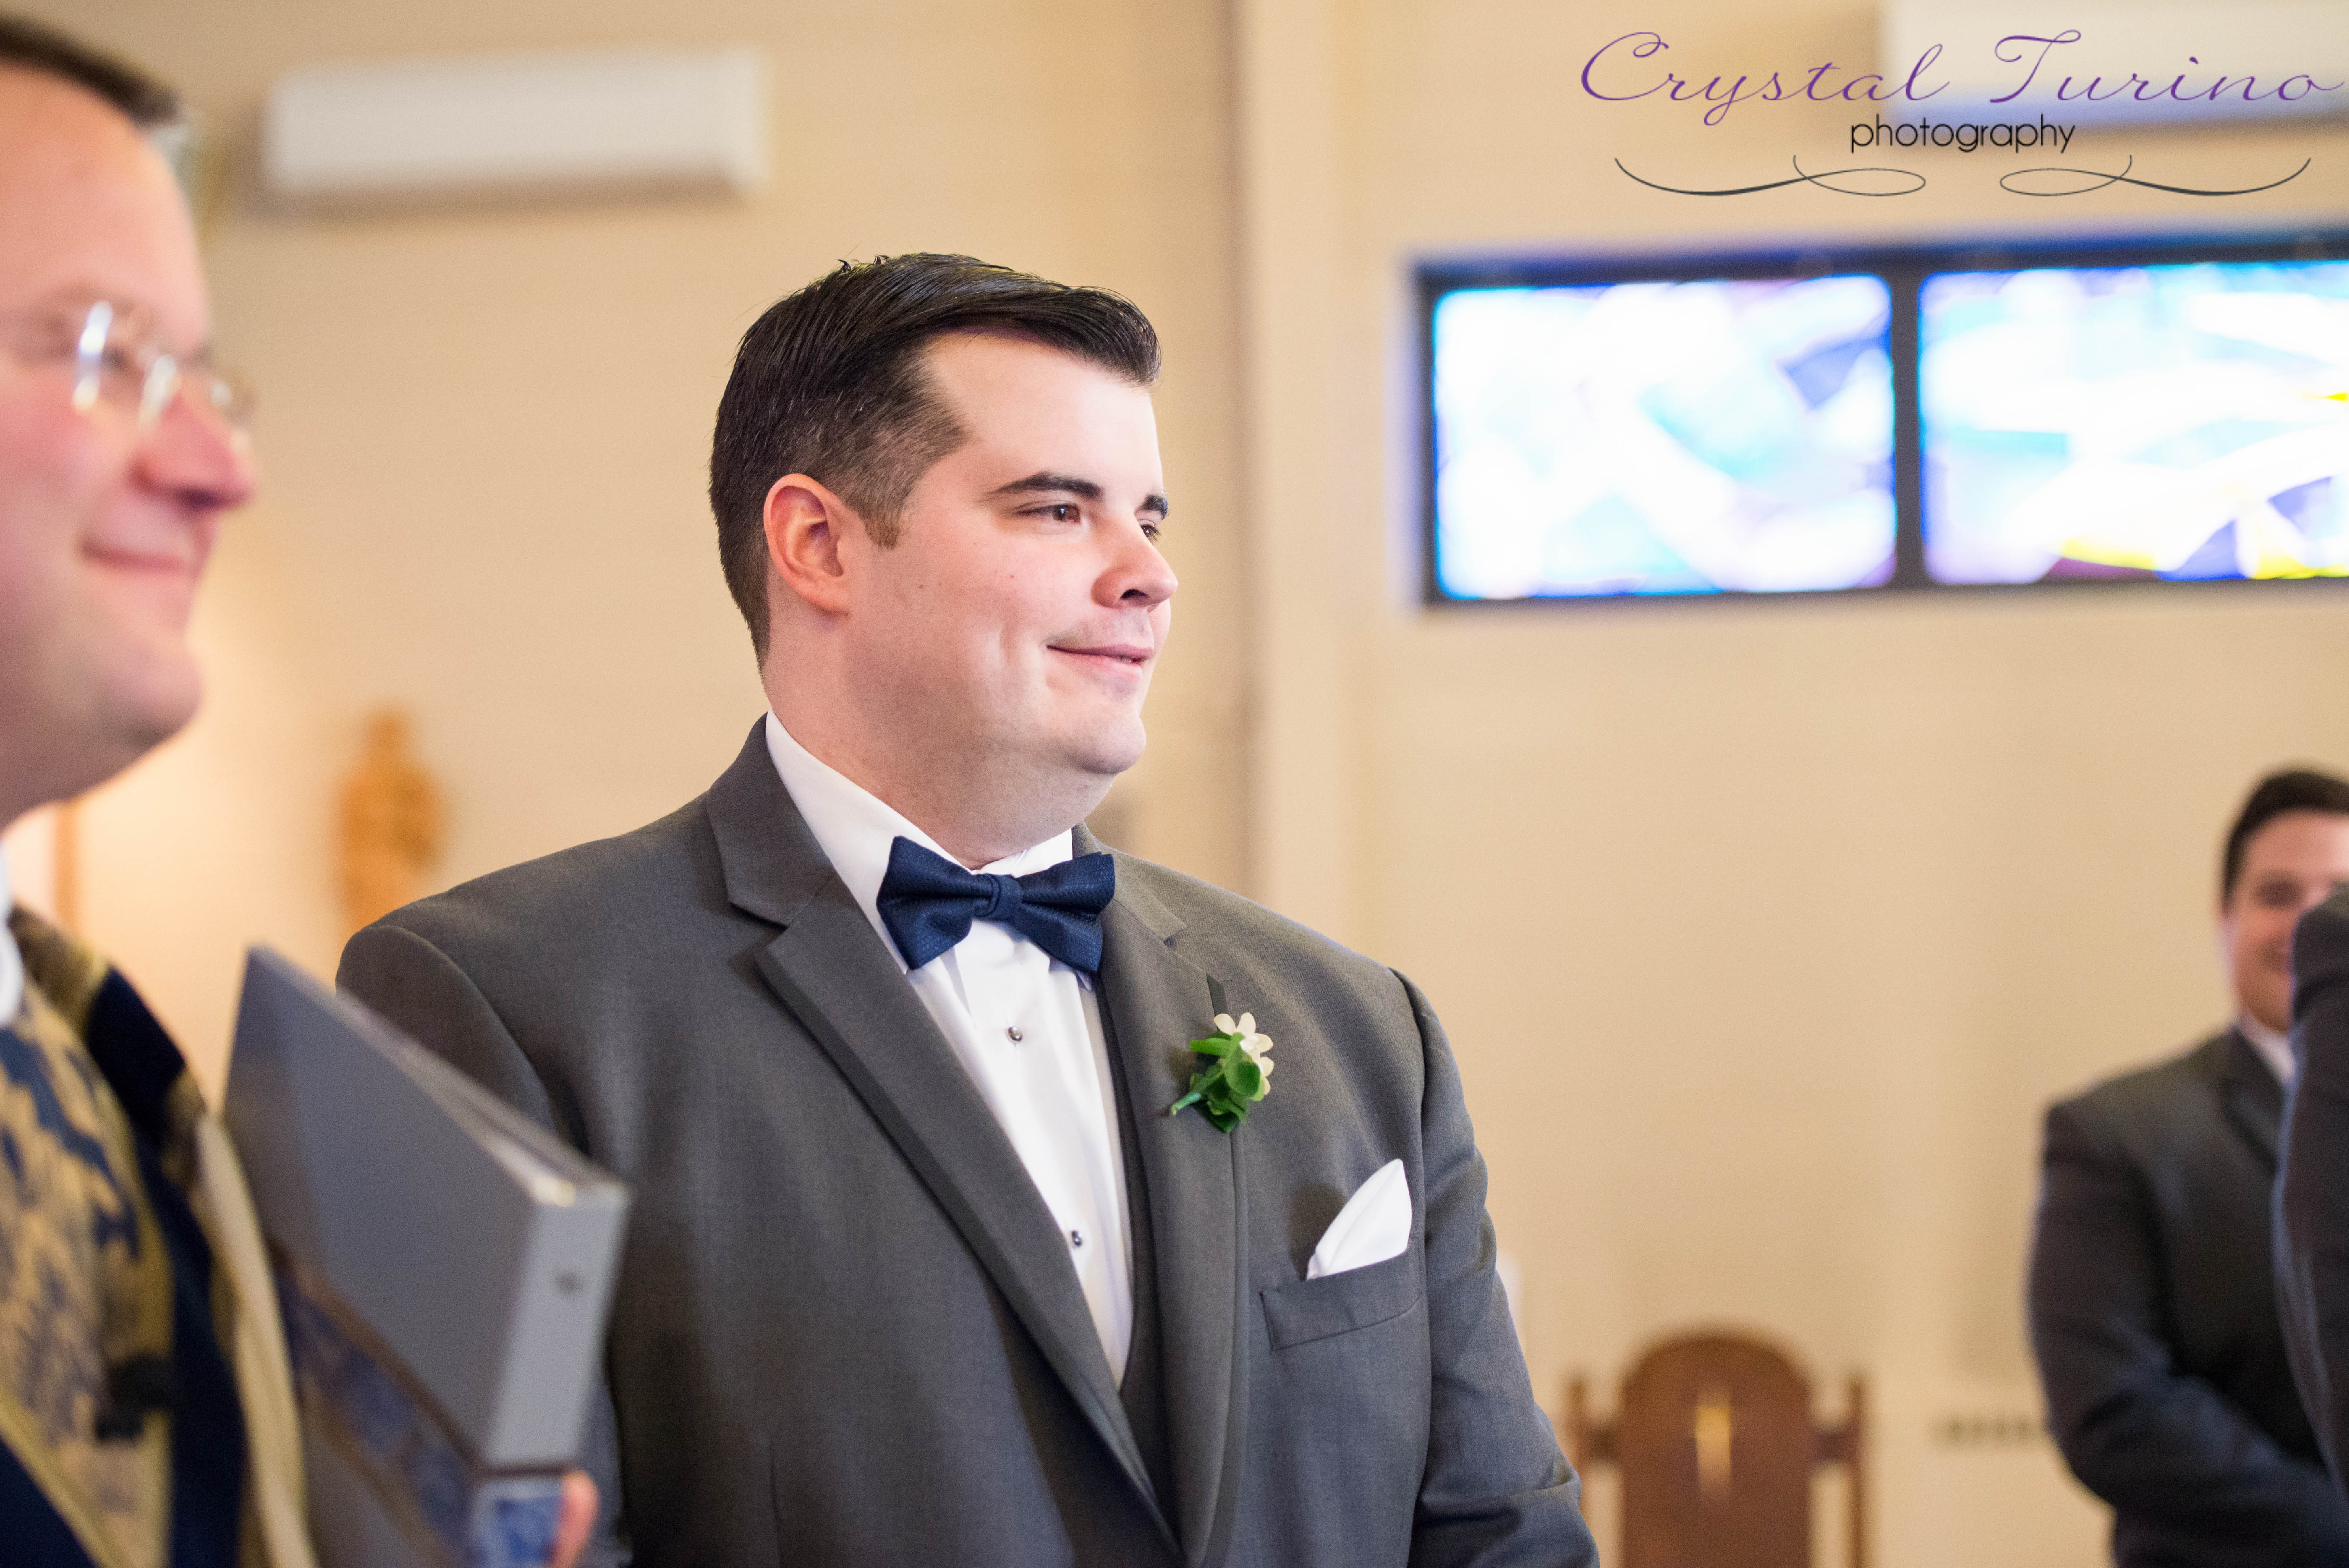 The look on Danâ€™s face as Erin came down the aisle was priceless!